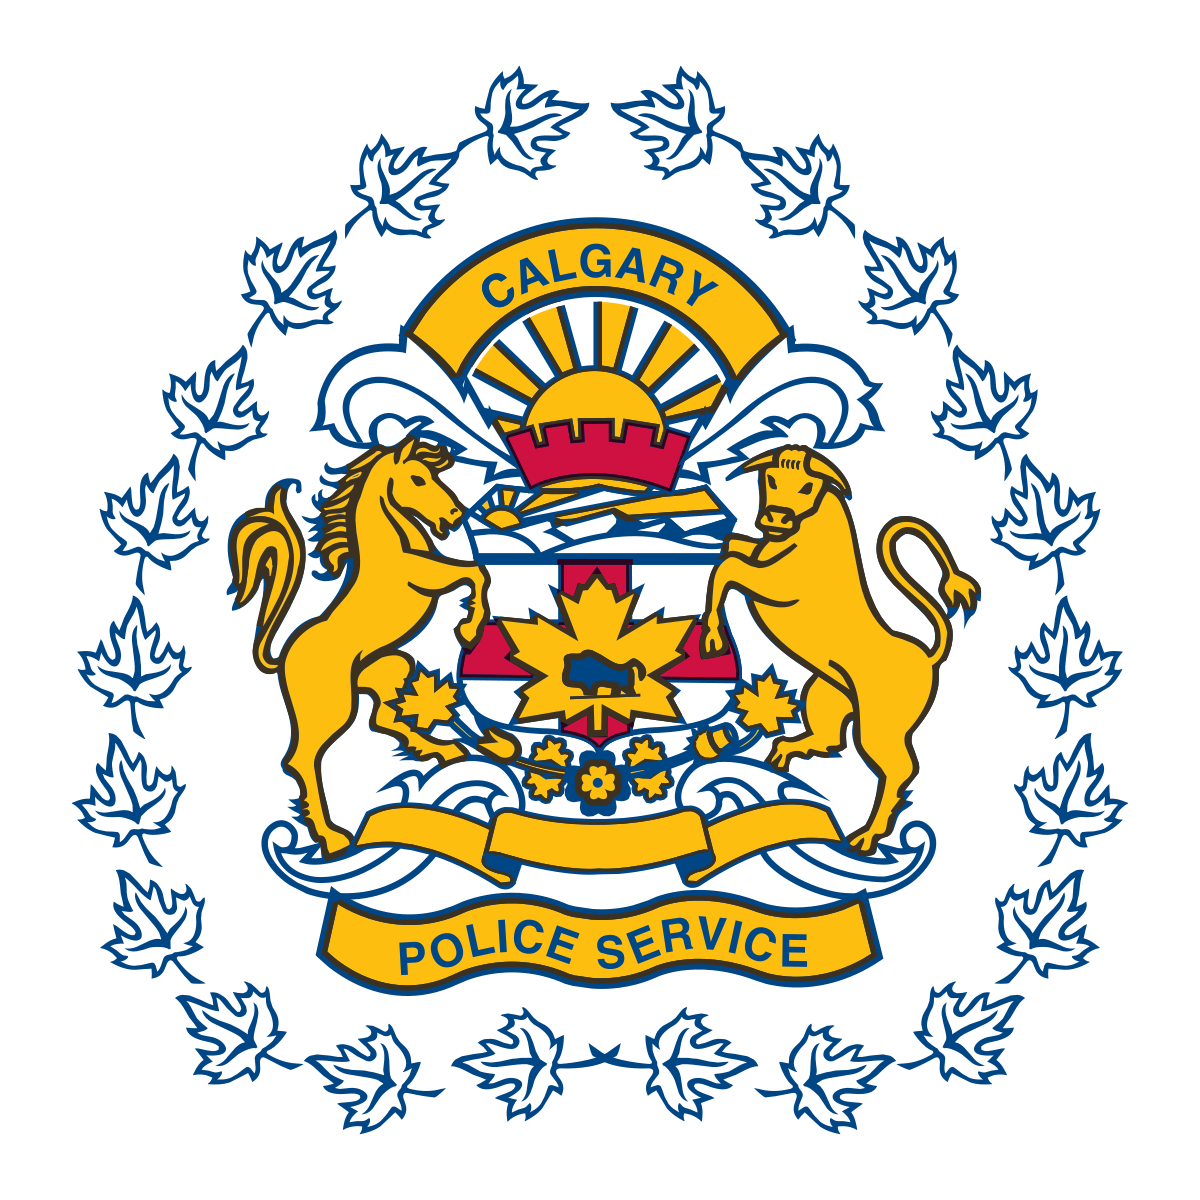 Emergency clipart policing. Calgary police service wikipedia